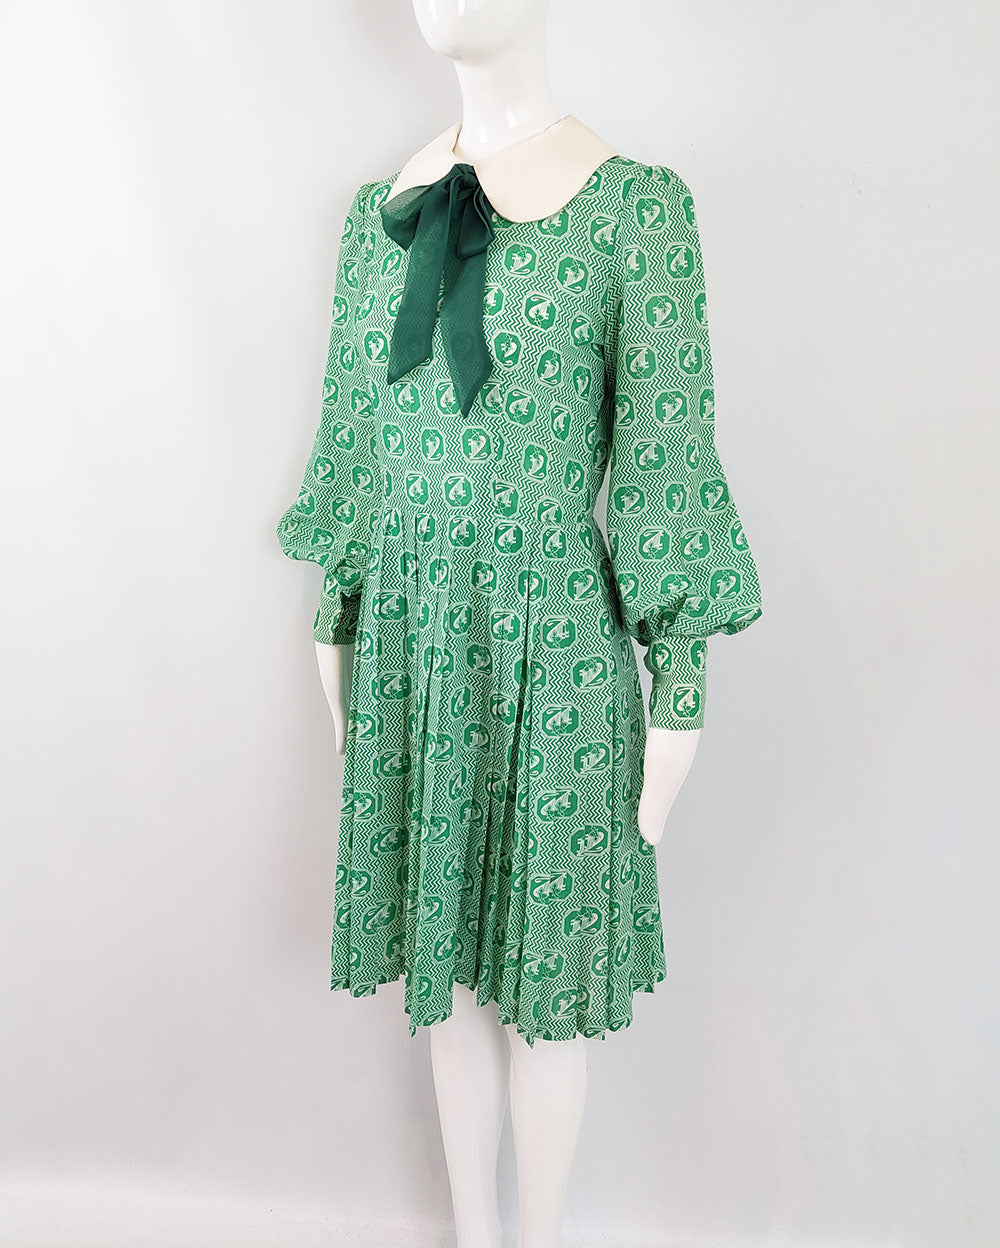 A vintage 1960s Jean Allen green pussybow dress with bishop sleeves and a pleated skirt.